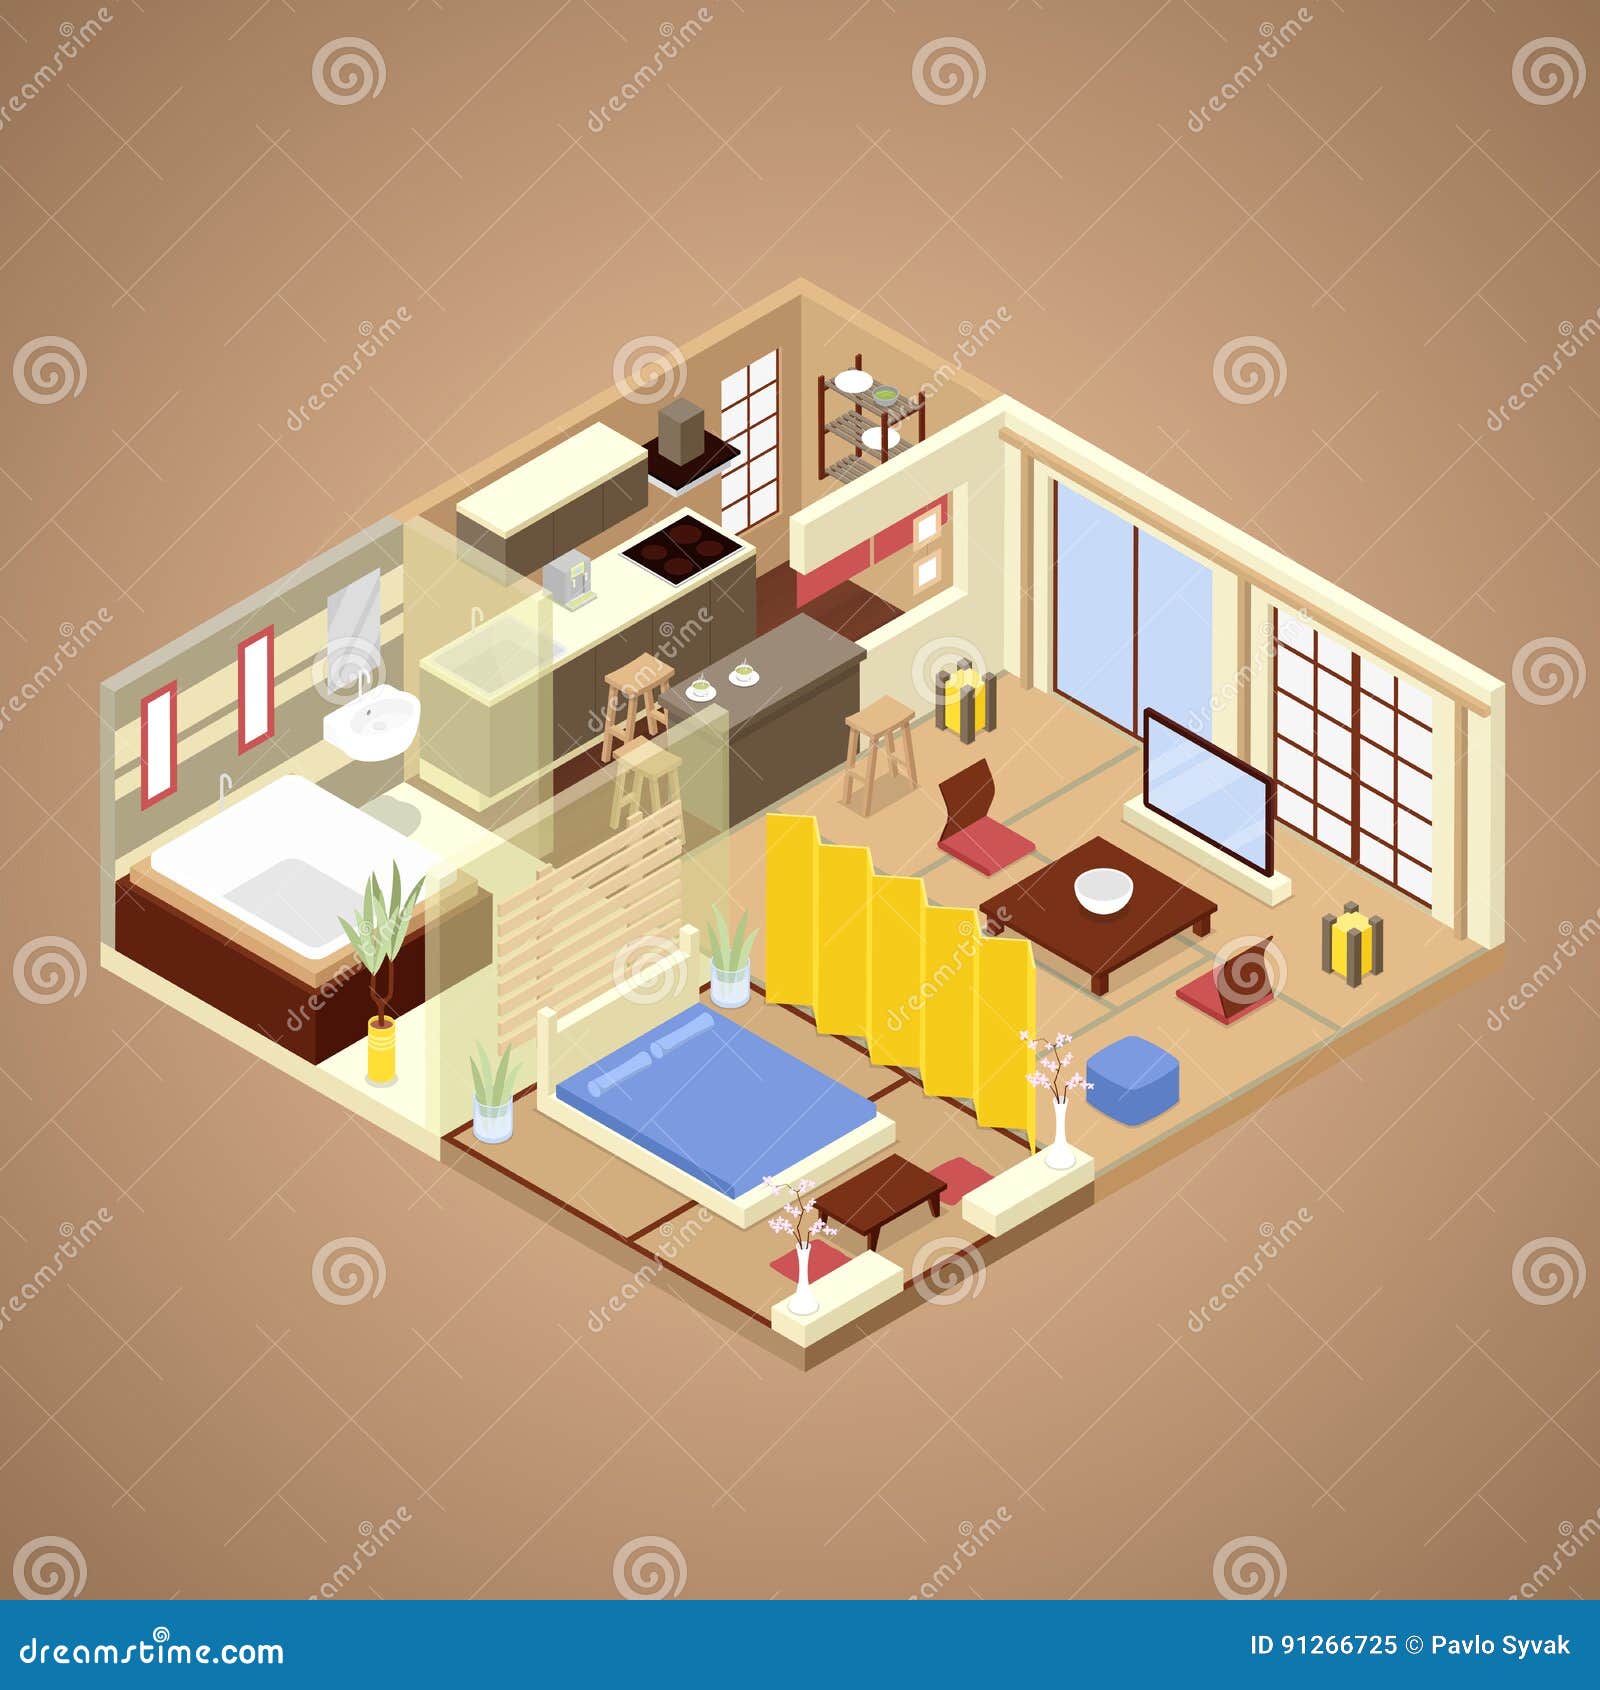 Japanese Style Apartment Interior Design With Kitchen Bedroom And Bathroom Isometric Flat Illustration Stock Vector Illustration Of Room Furniture 91266725